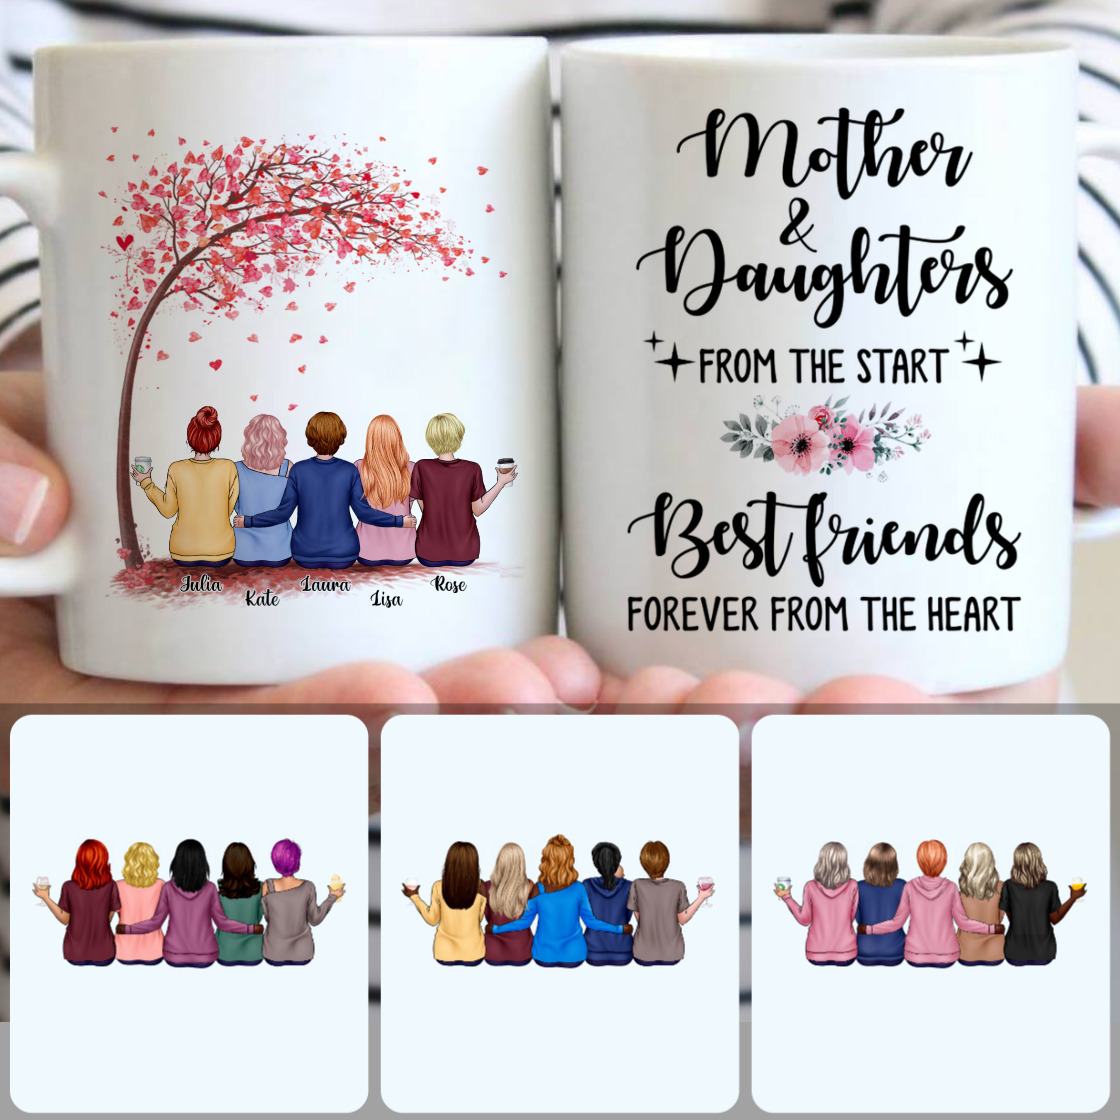 Personalized Mug, Unique Gifts For Daughters, Mother & 4 Daughters Customized Coffee Mug With Names